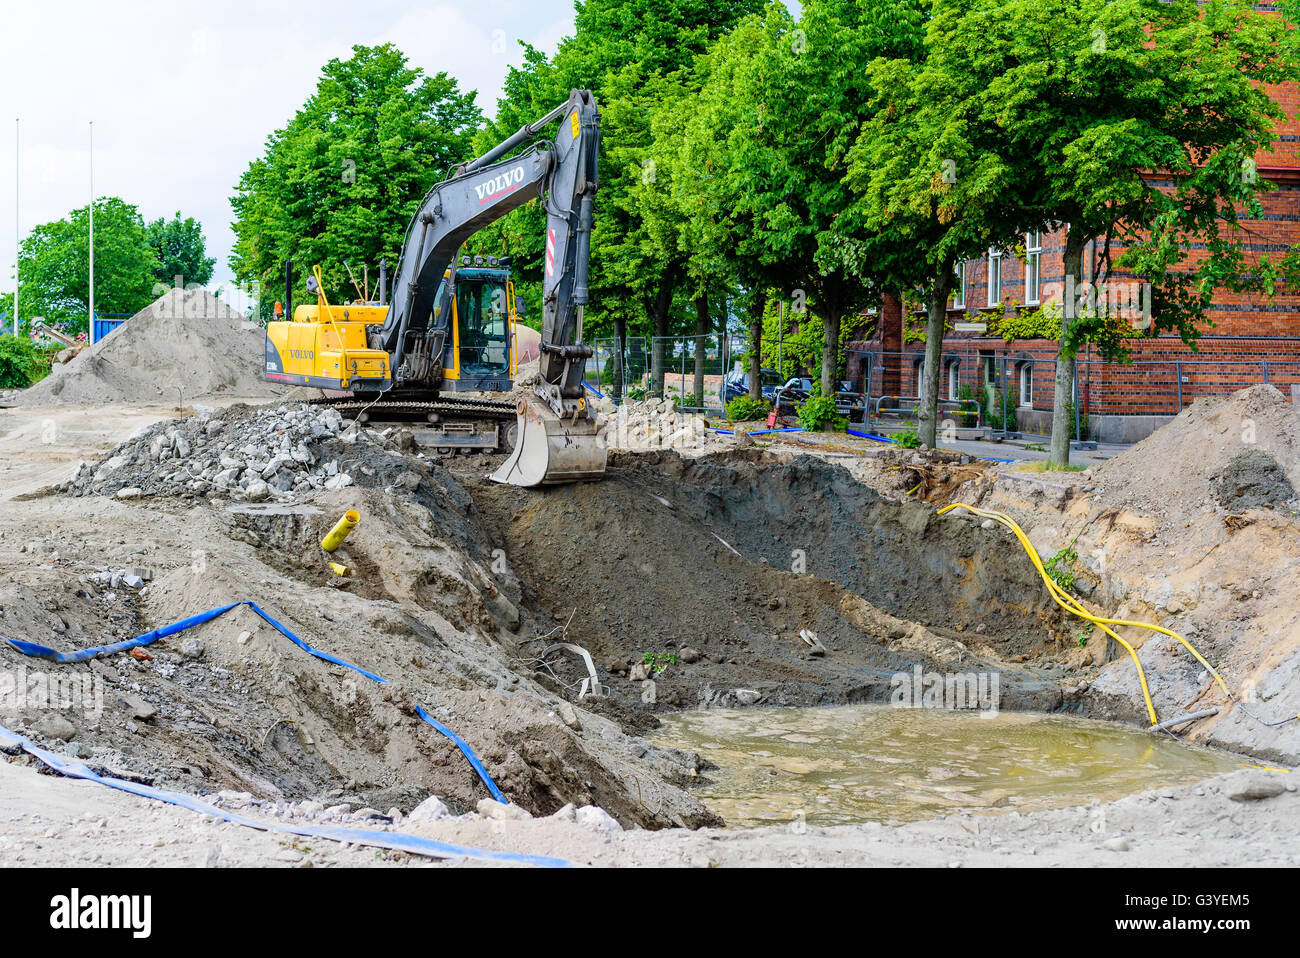 Karlskrona, Sweden - June 16, 2016: Yellow Volvo EC210 excavator digging a large hole in the ground. Water is filling up in the Stock Photo